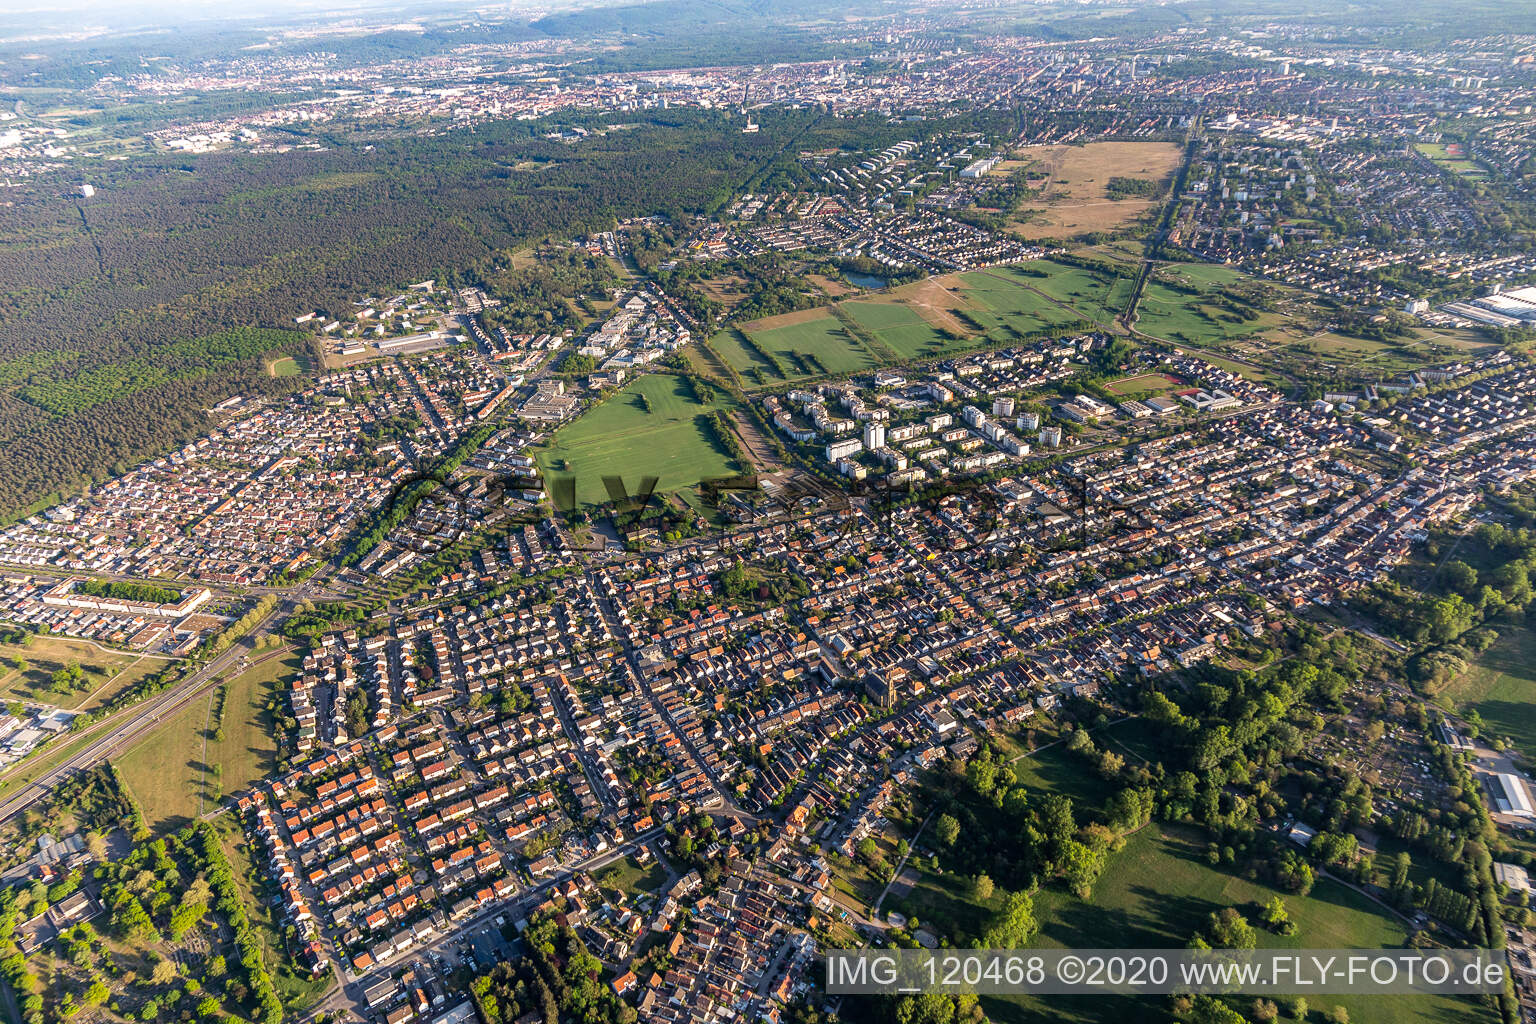 Aerial view of District Neureut in Karlsruhe in the state Baden-Wuerttemberg, Germany